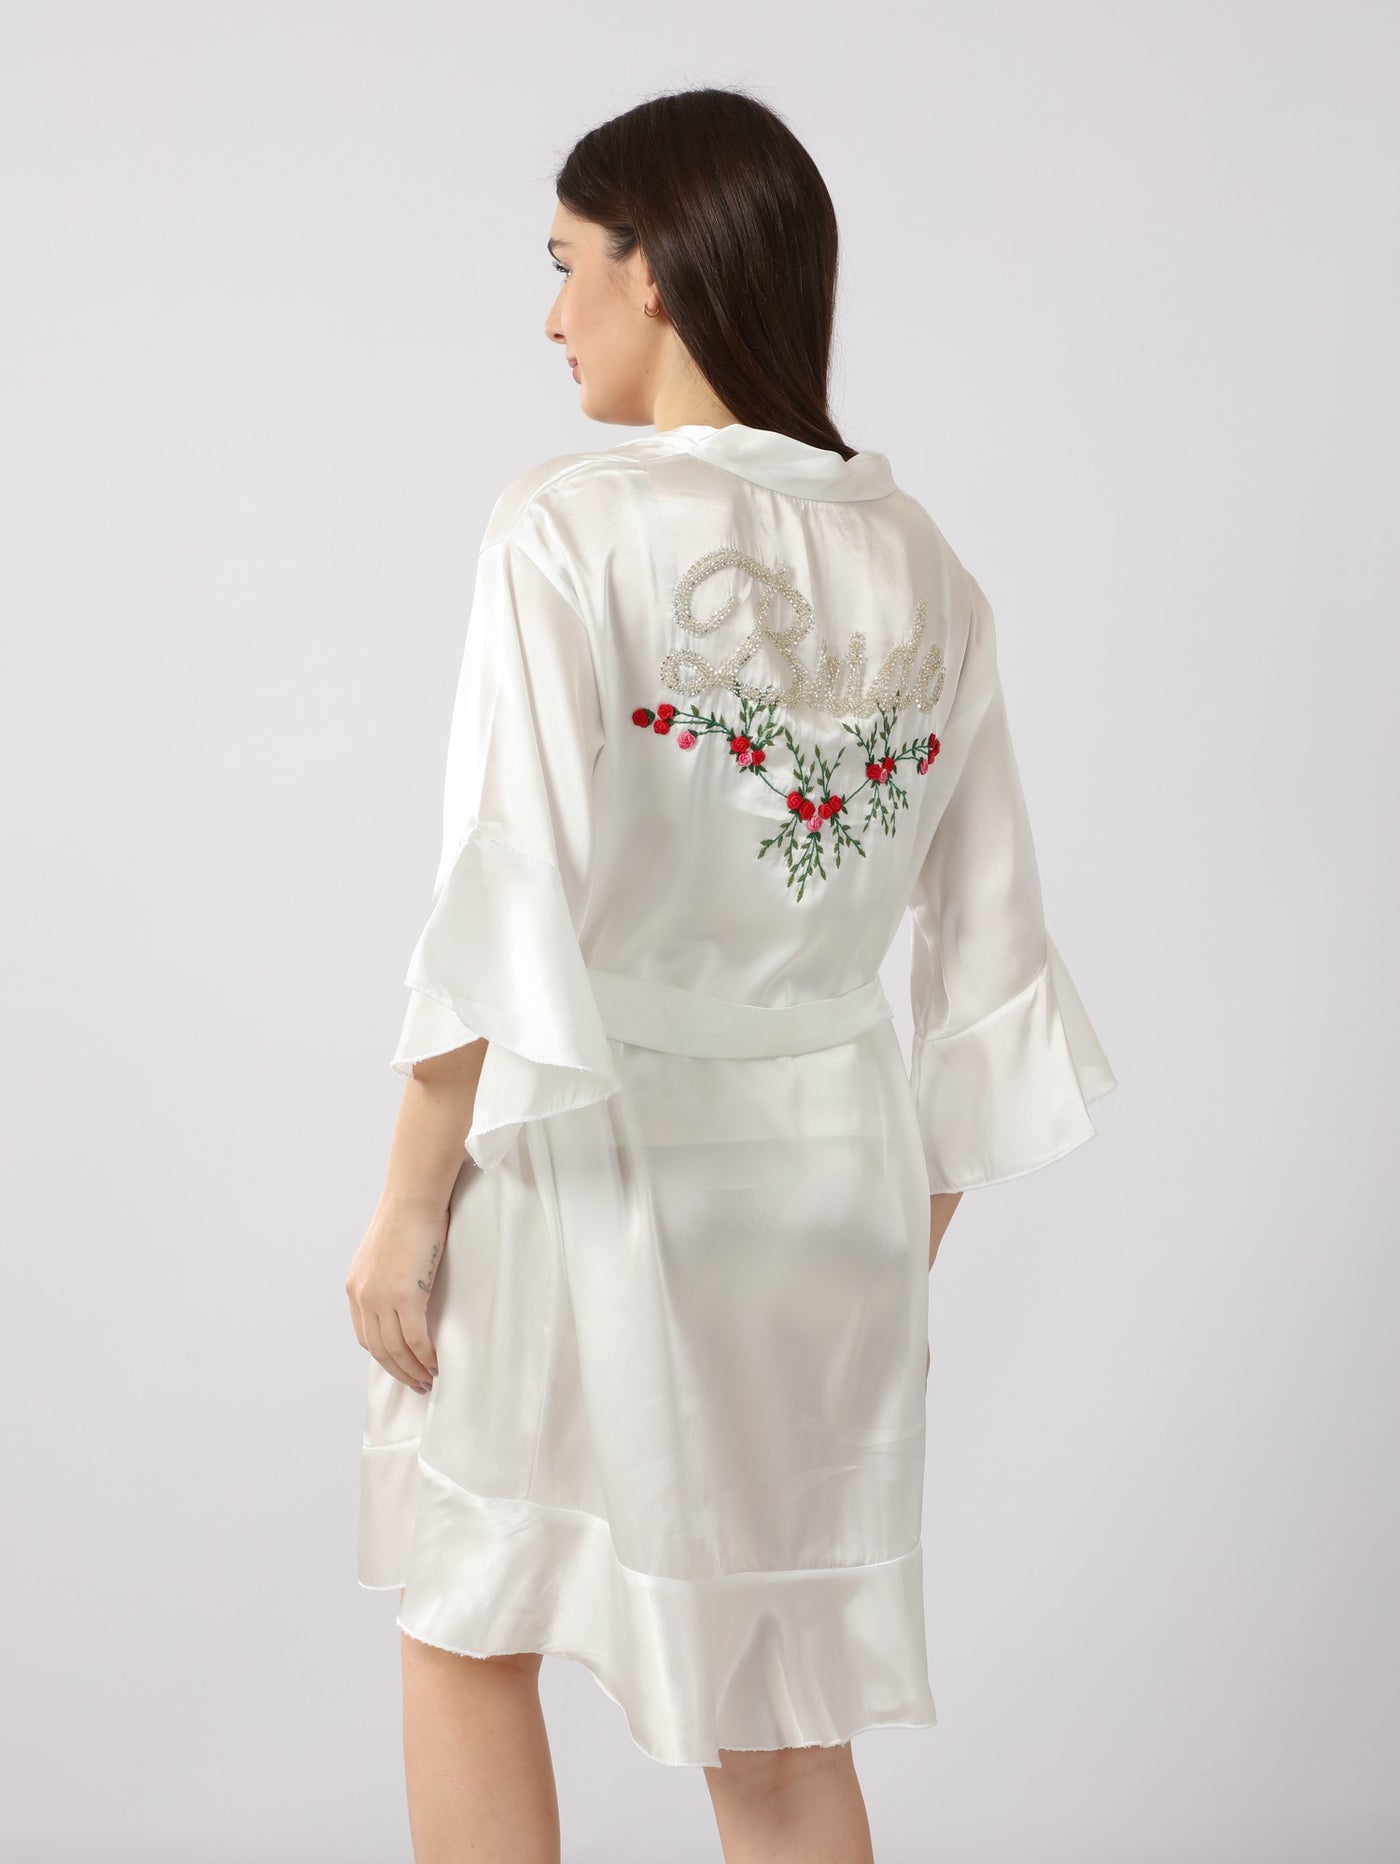 Robe - Floral Embroidery - Bead Embellishment - Bridal